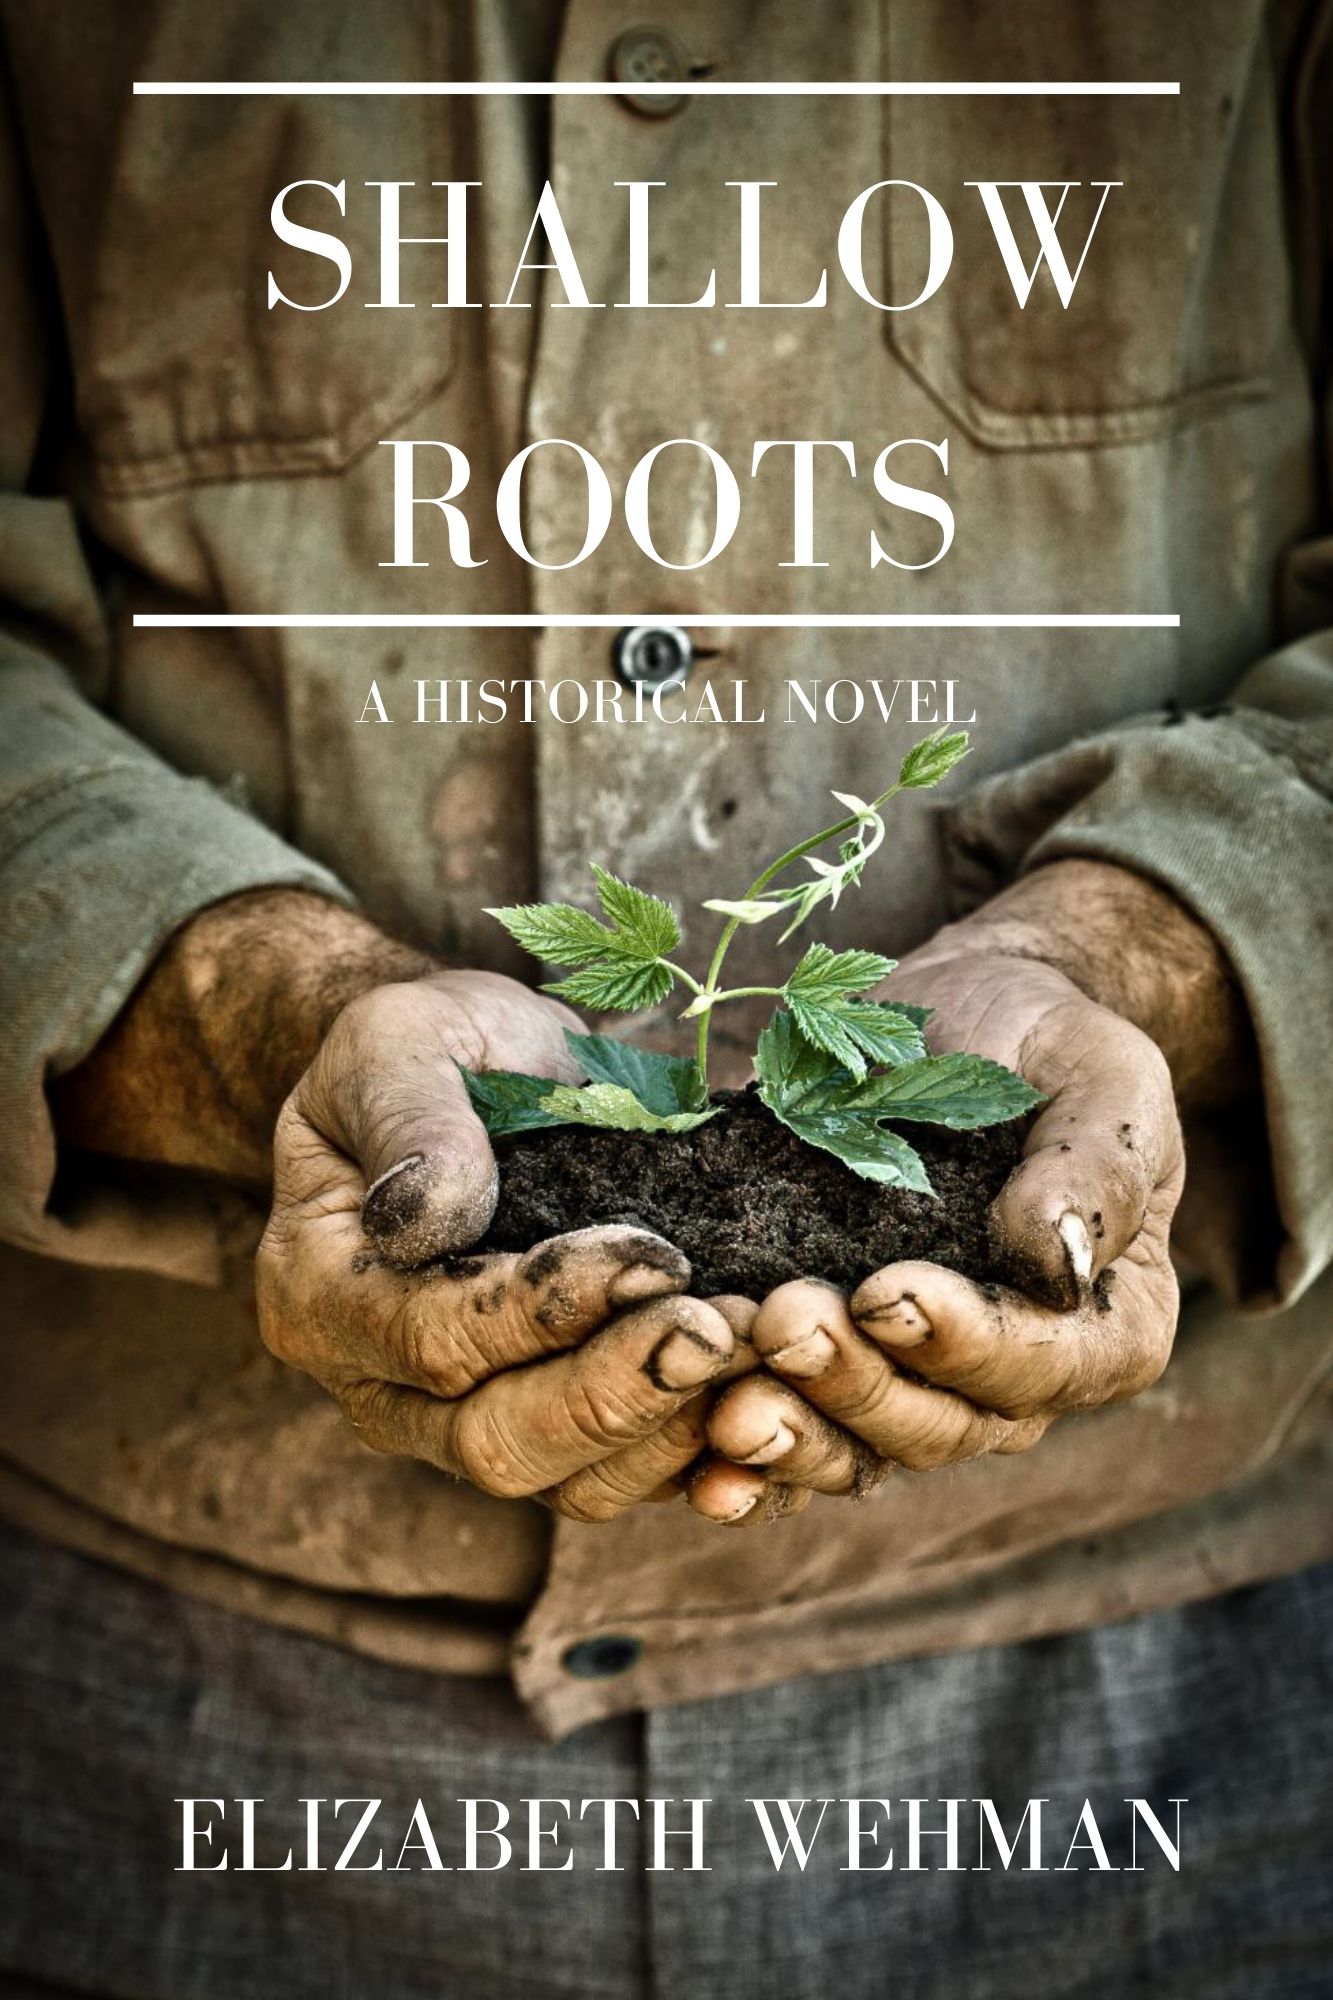 Shallow Roots - ebook cover (6 × 9 in)